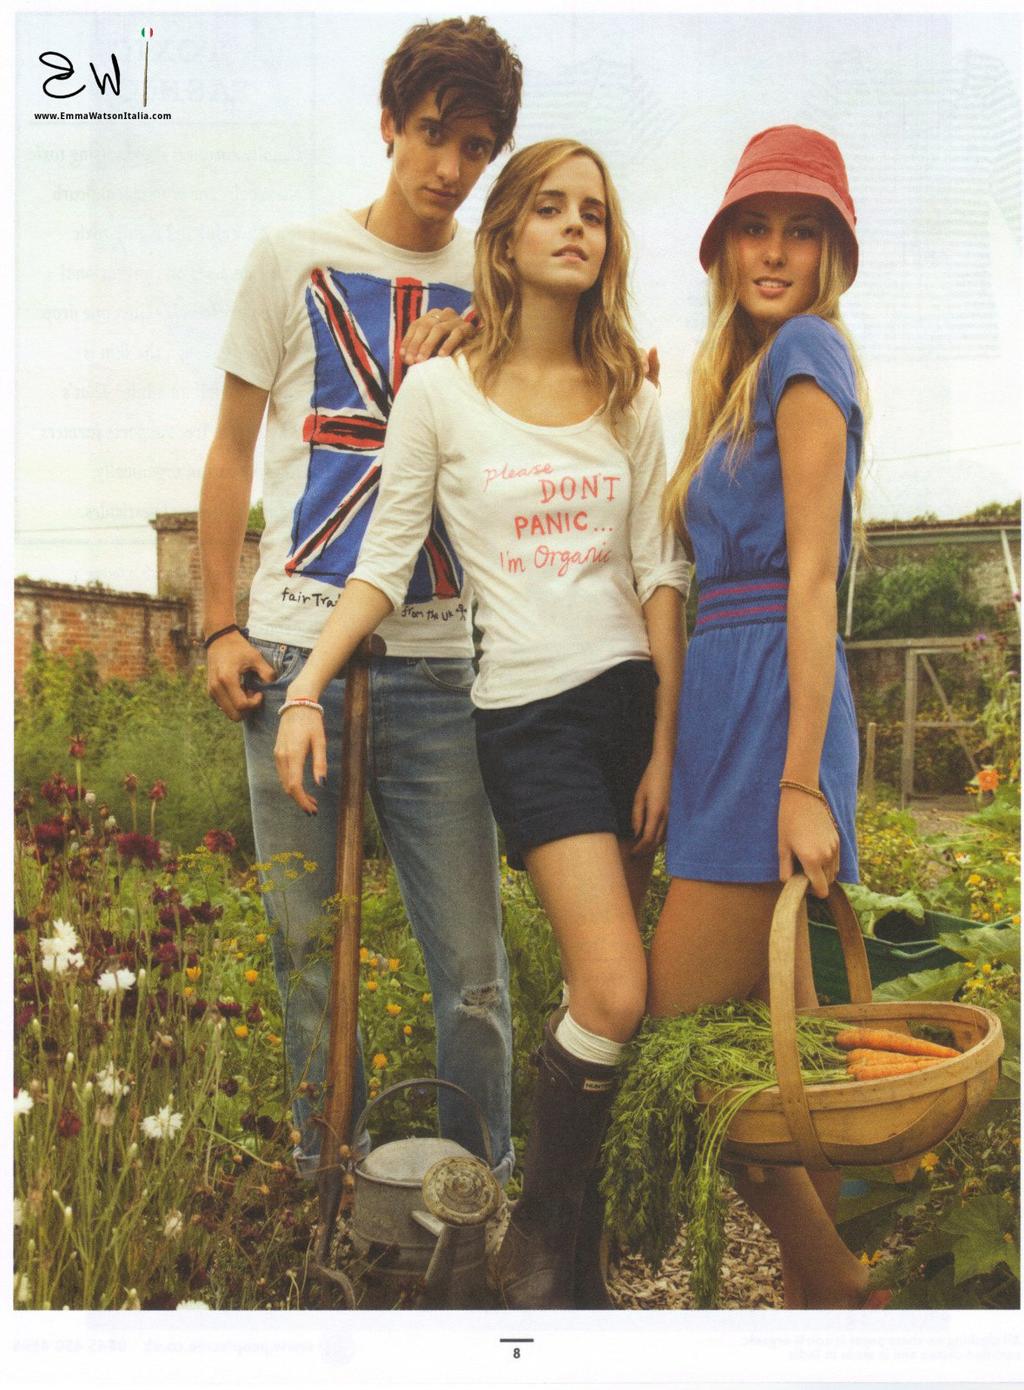 The Love from Emma Collection According to the People Tree website, the aim was to create a range for teenagers (16-24, boys and girls) that appealed to their consciences as well as their sense